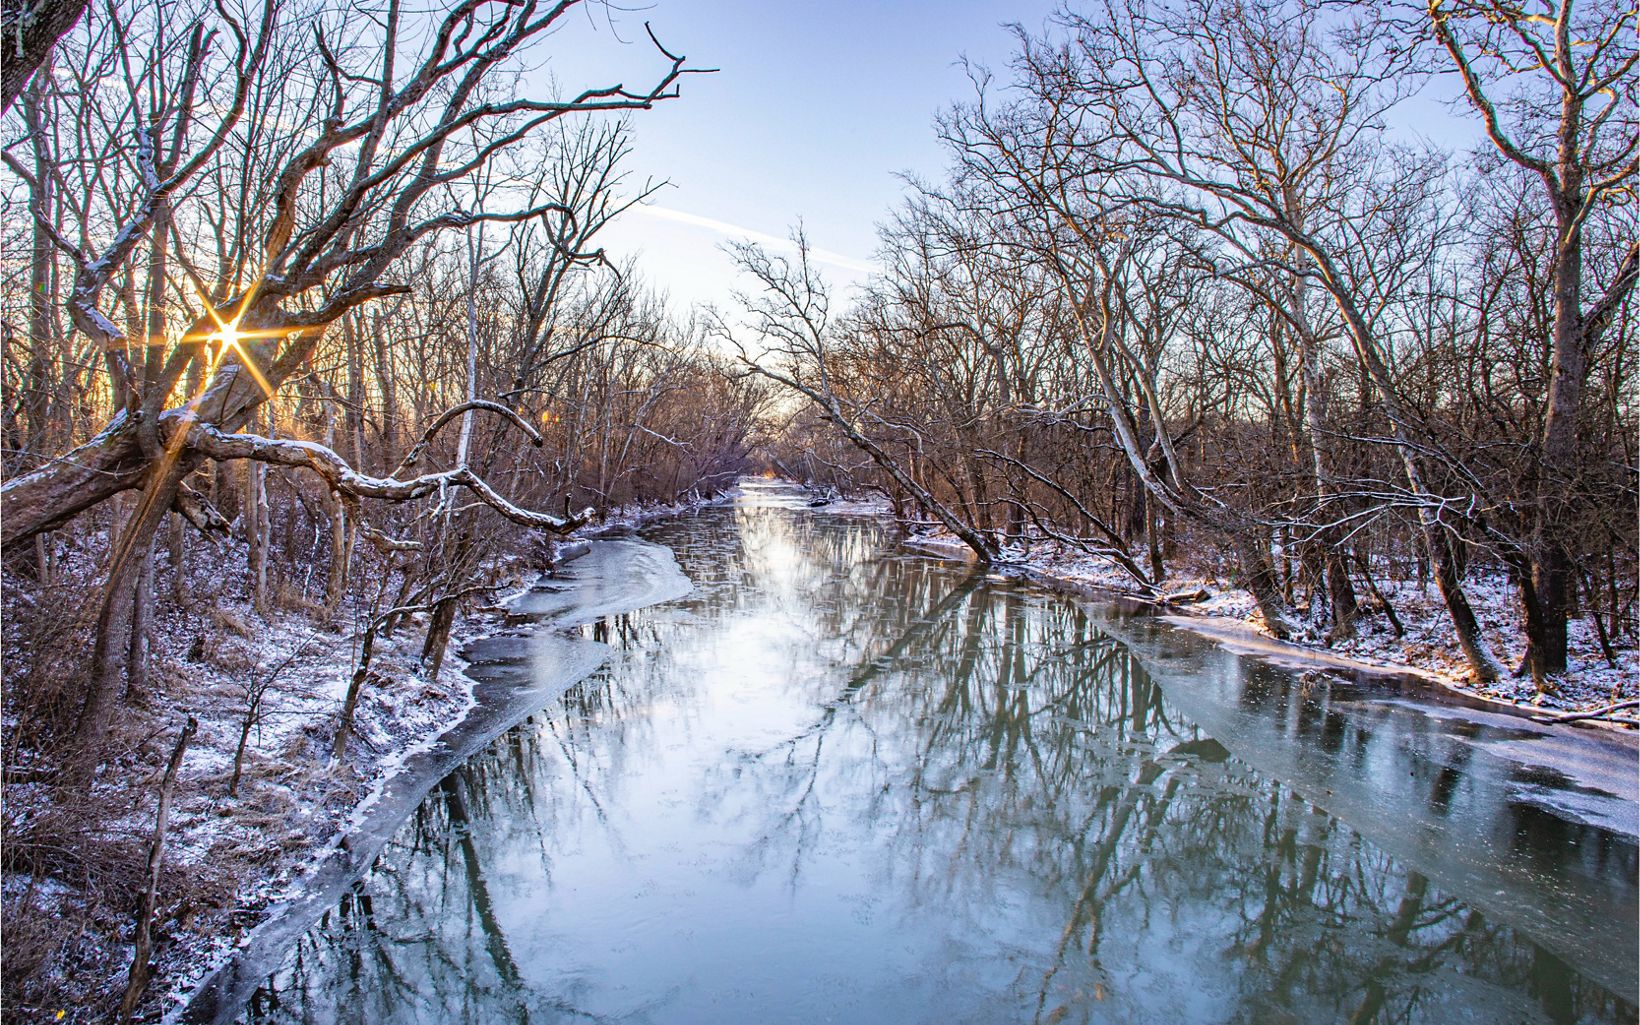 Snow-covered trees along a partially frozen creek at sunset.